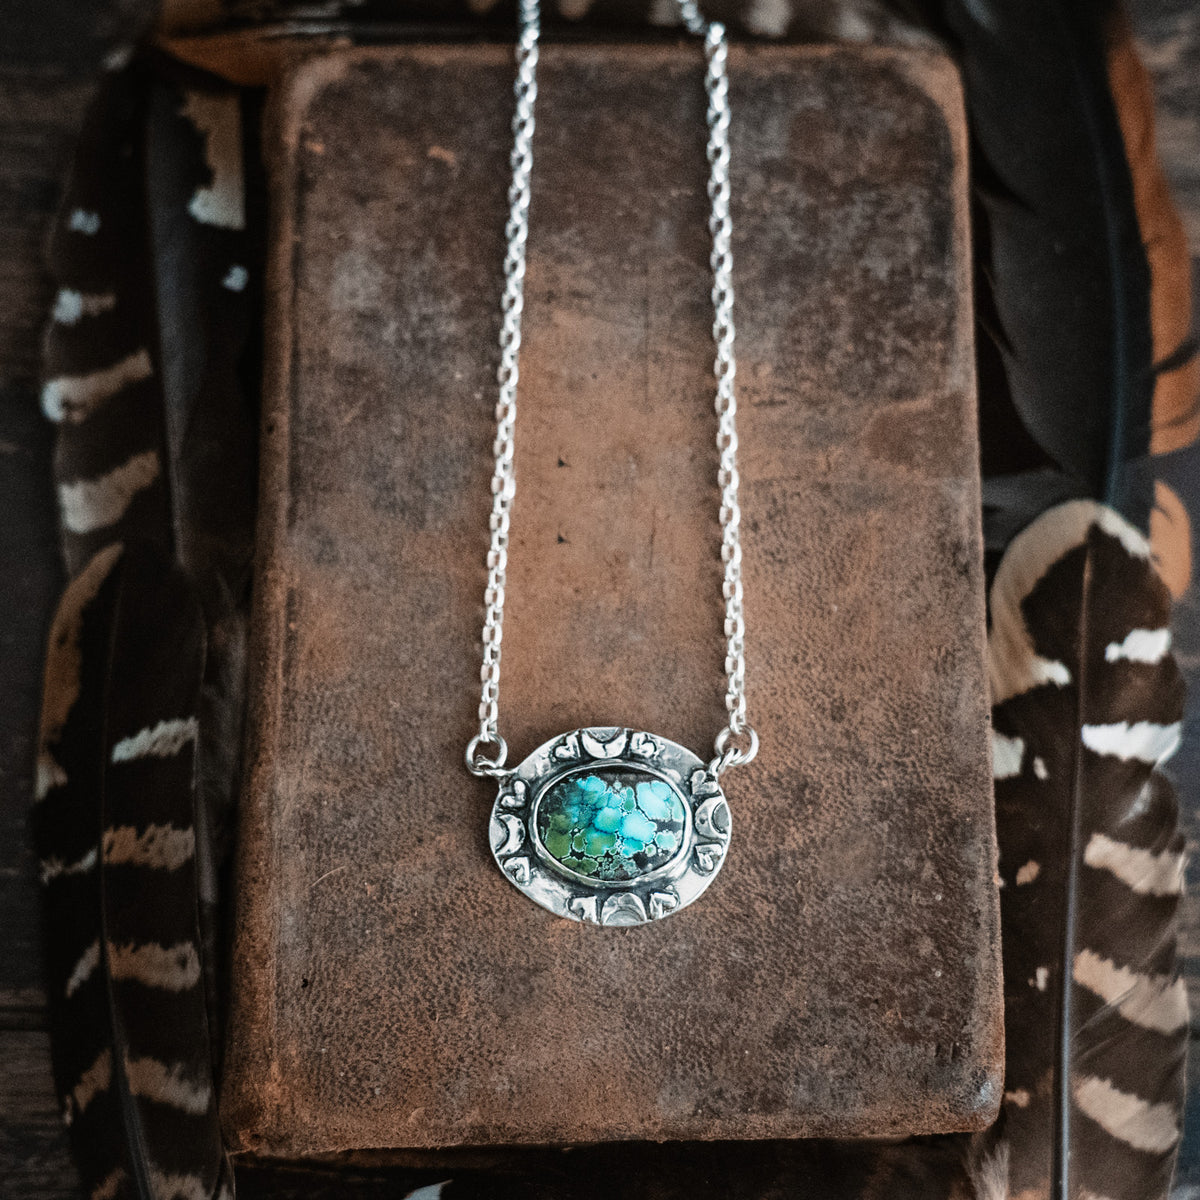 Find the Magic Turquoise Necklace